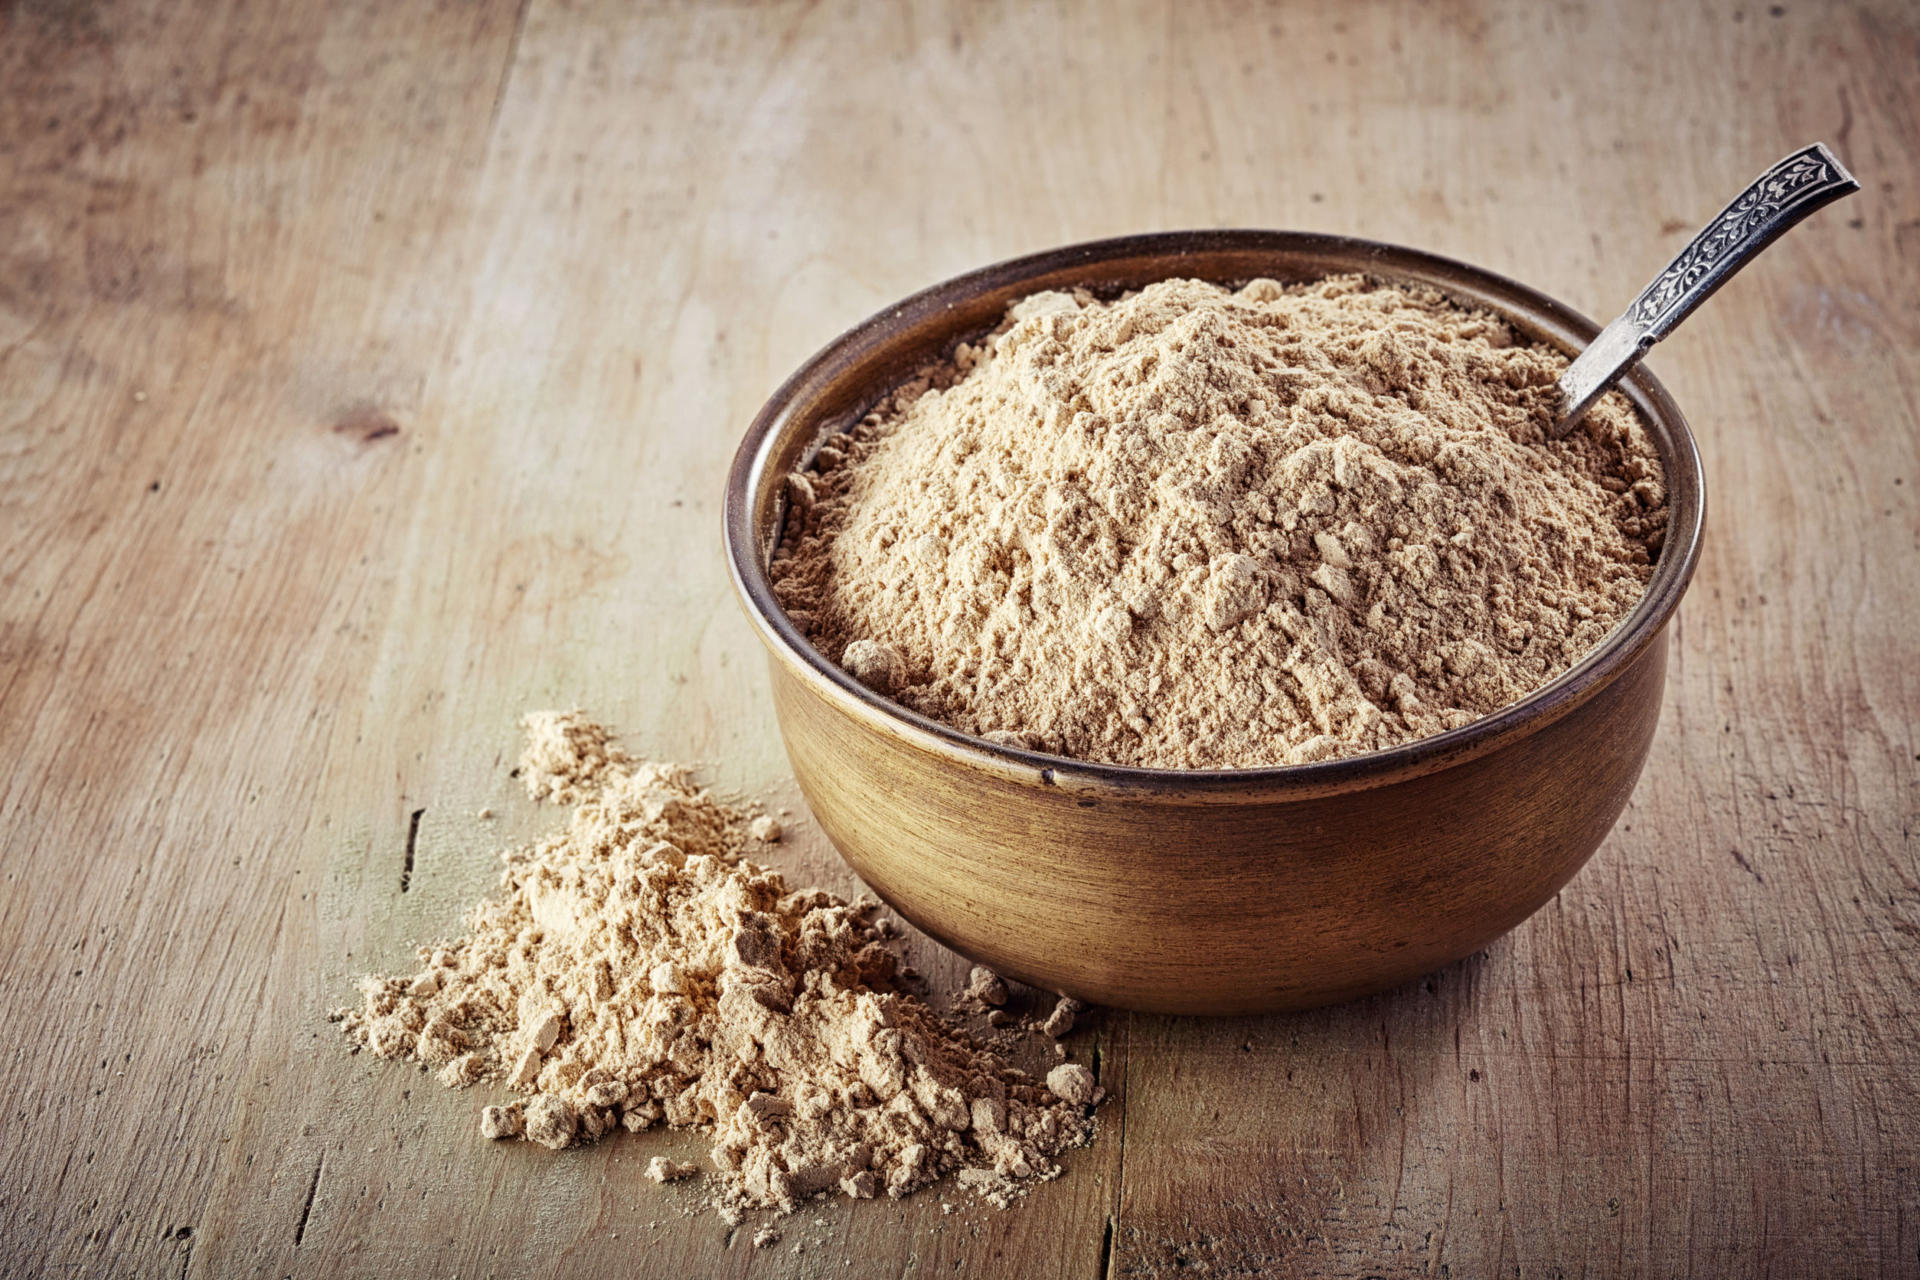 43470422 - bowl of maca powder on wooden background